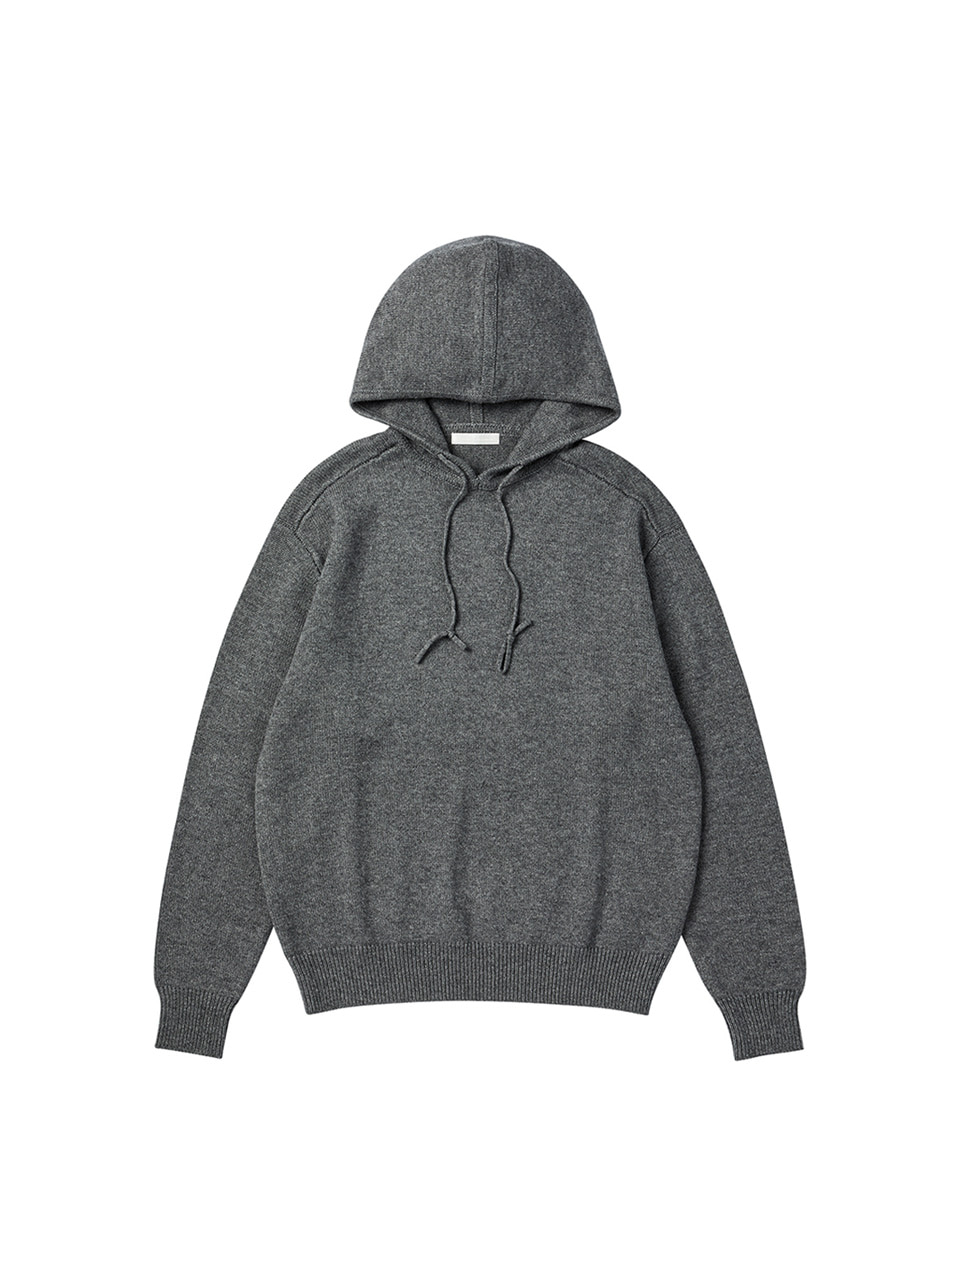 WORTHWHILE MOVEMENT - COMFY KNIT HOODIE (GREY)